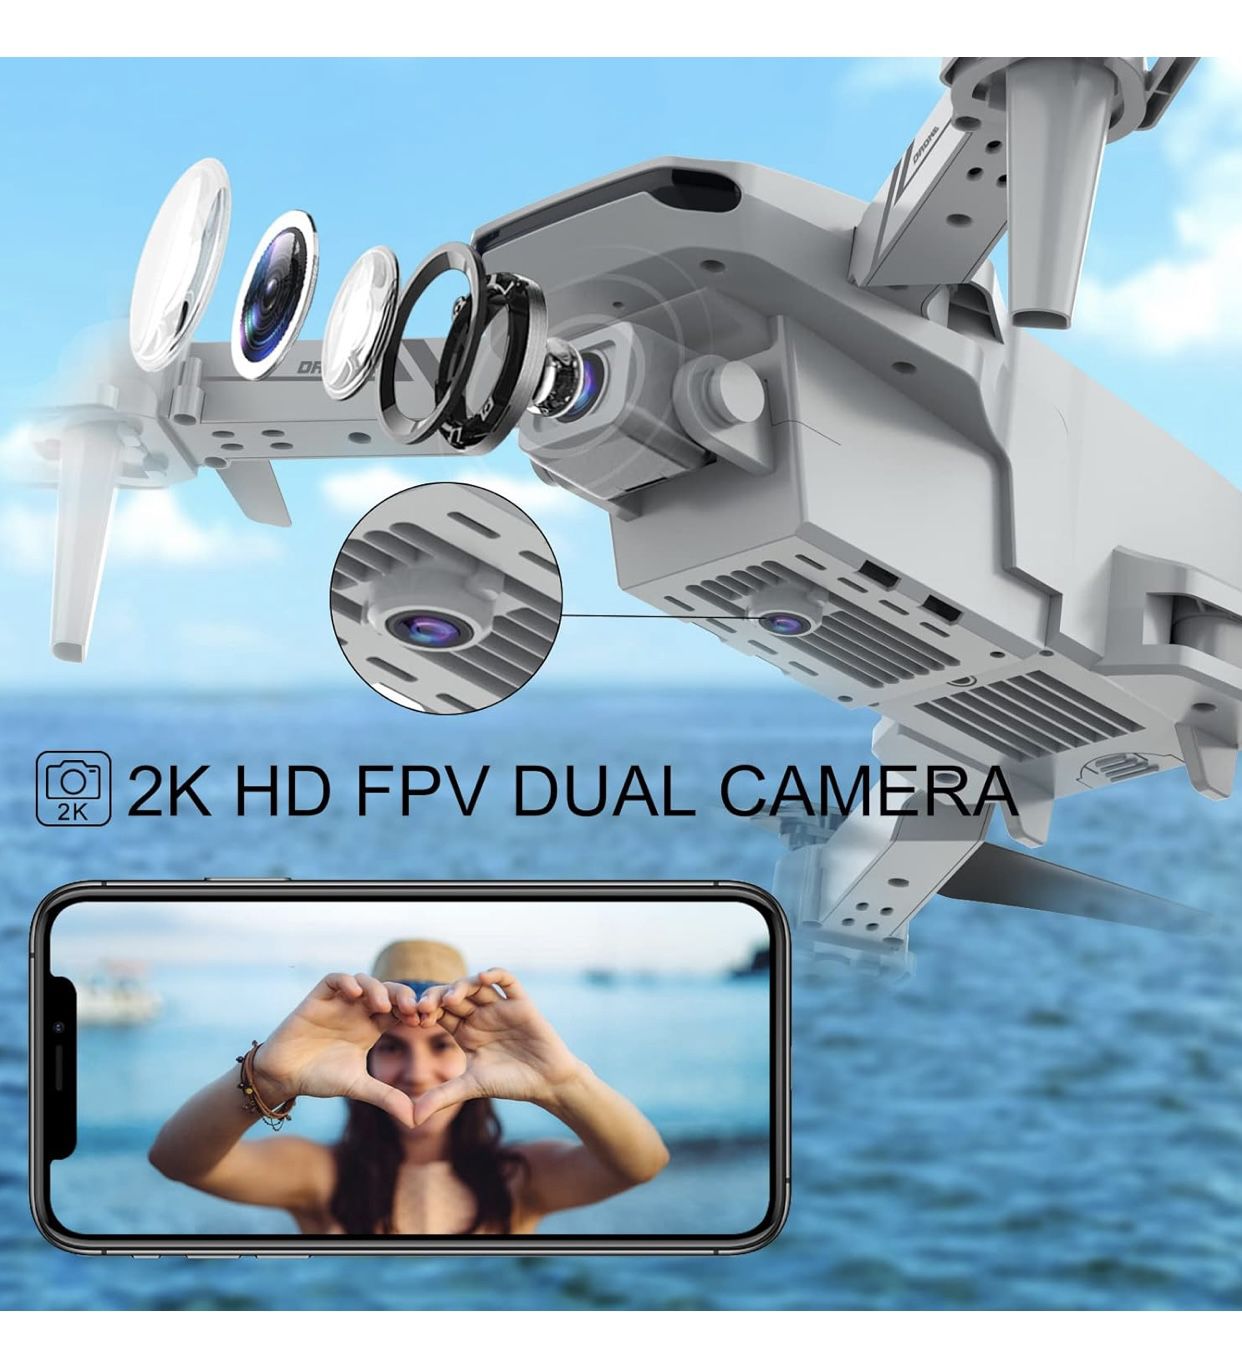 2K HD FPV Dual Camera for Adults and Kids, Mini RC Drone with 3D Flips/Altitude Hold/Headless Mode/Gesture Selfie/Waypoint Flight, 2 Batteries and Cas